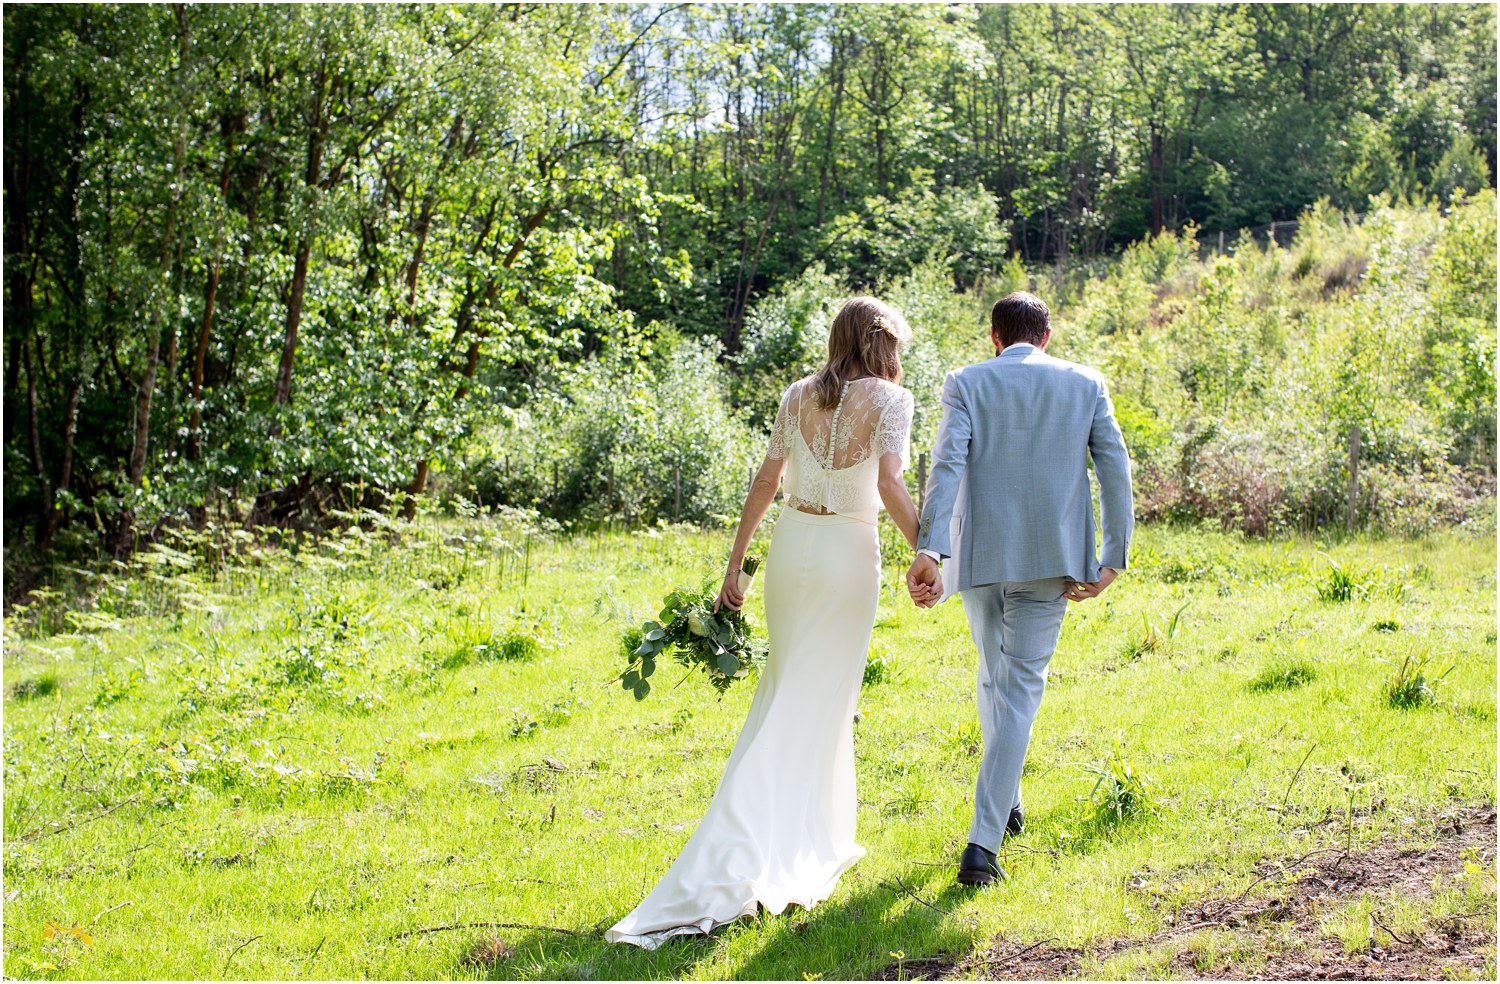 getting married by lake in woods in sussex